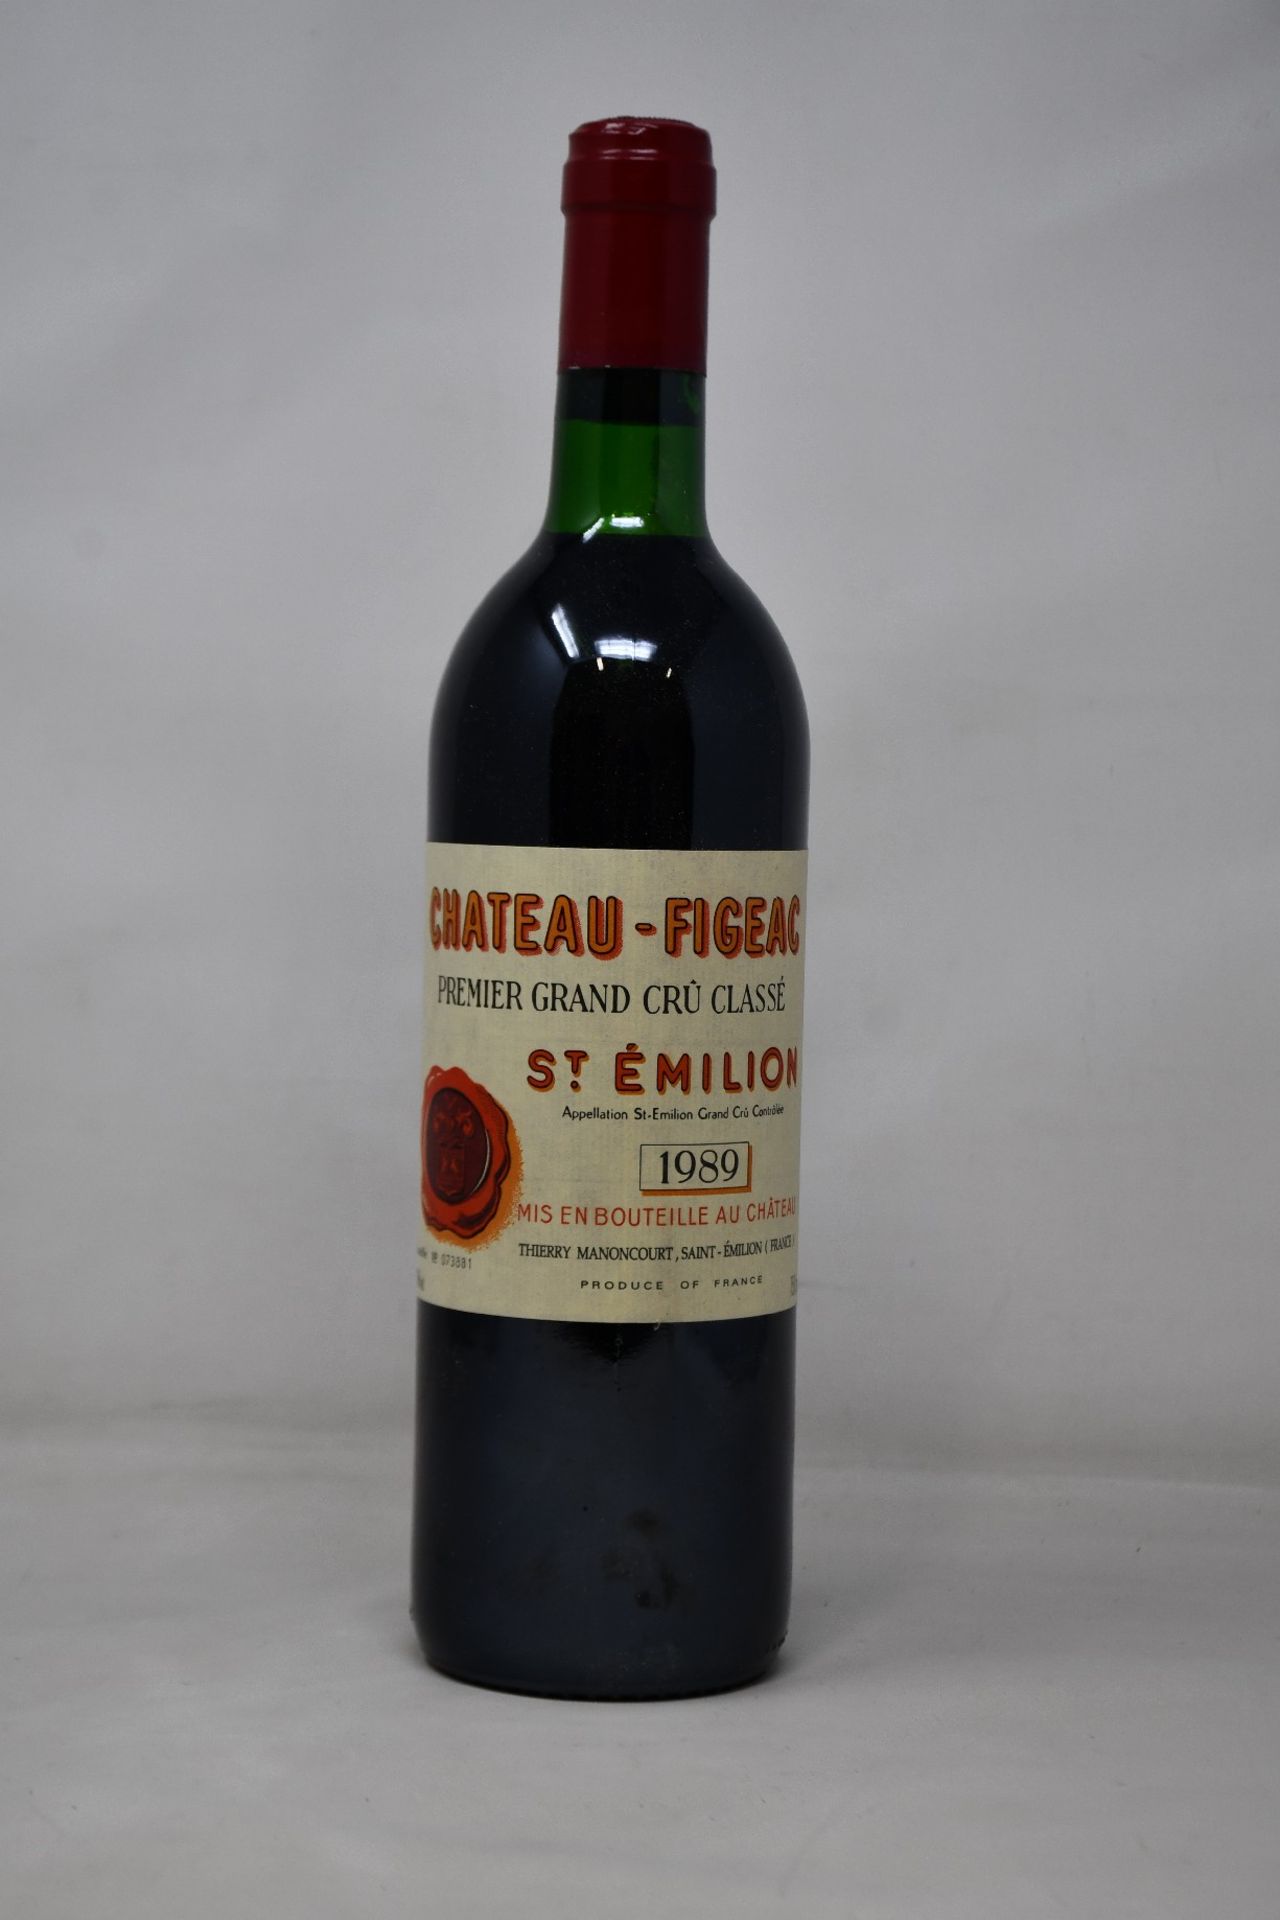 A bottle of 1989 Chateau-Figerac Premier Grand Cru St Emilion (Over 18s only).